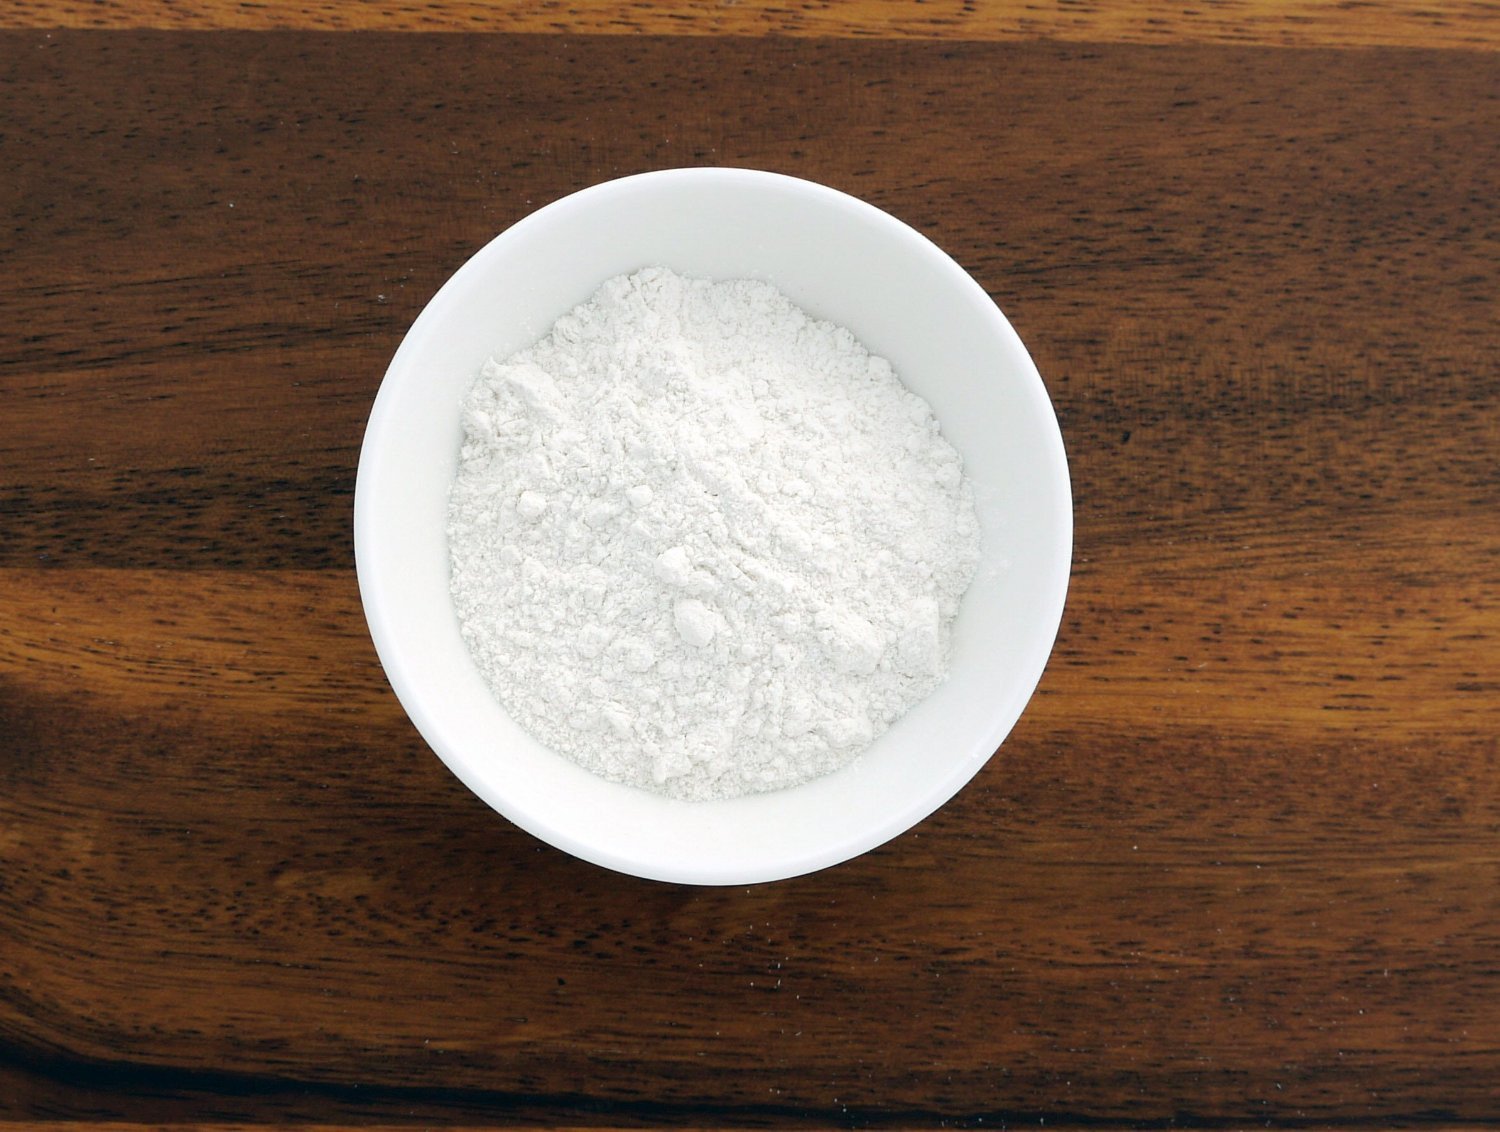 This is an image of a small white bowl containing Cassava Flour from Anthony's Goods